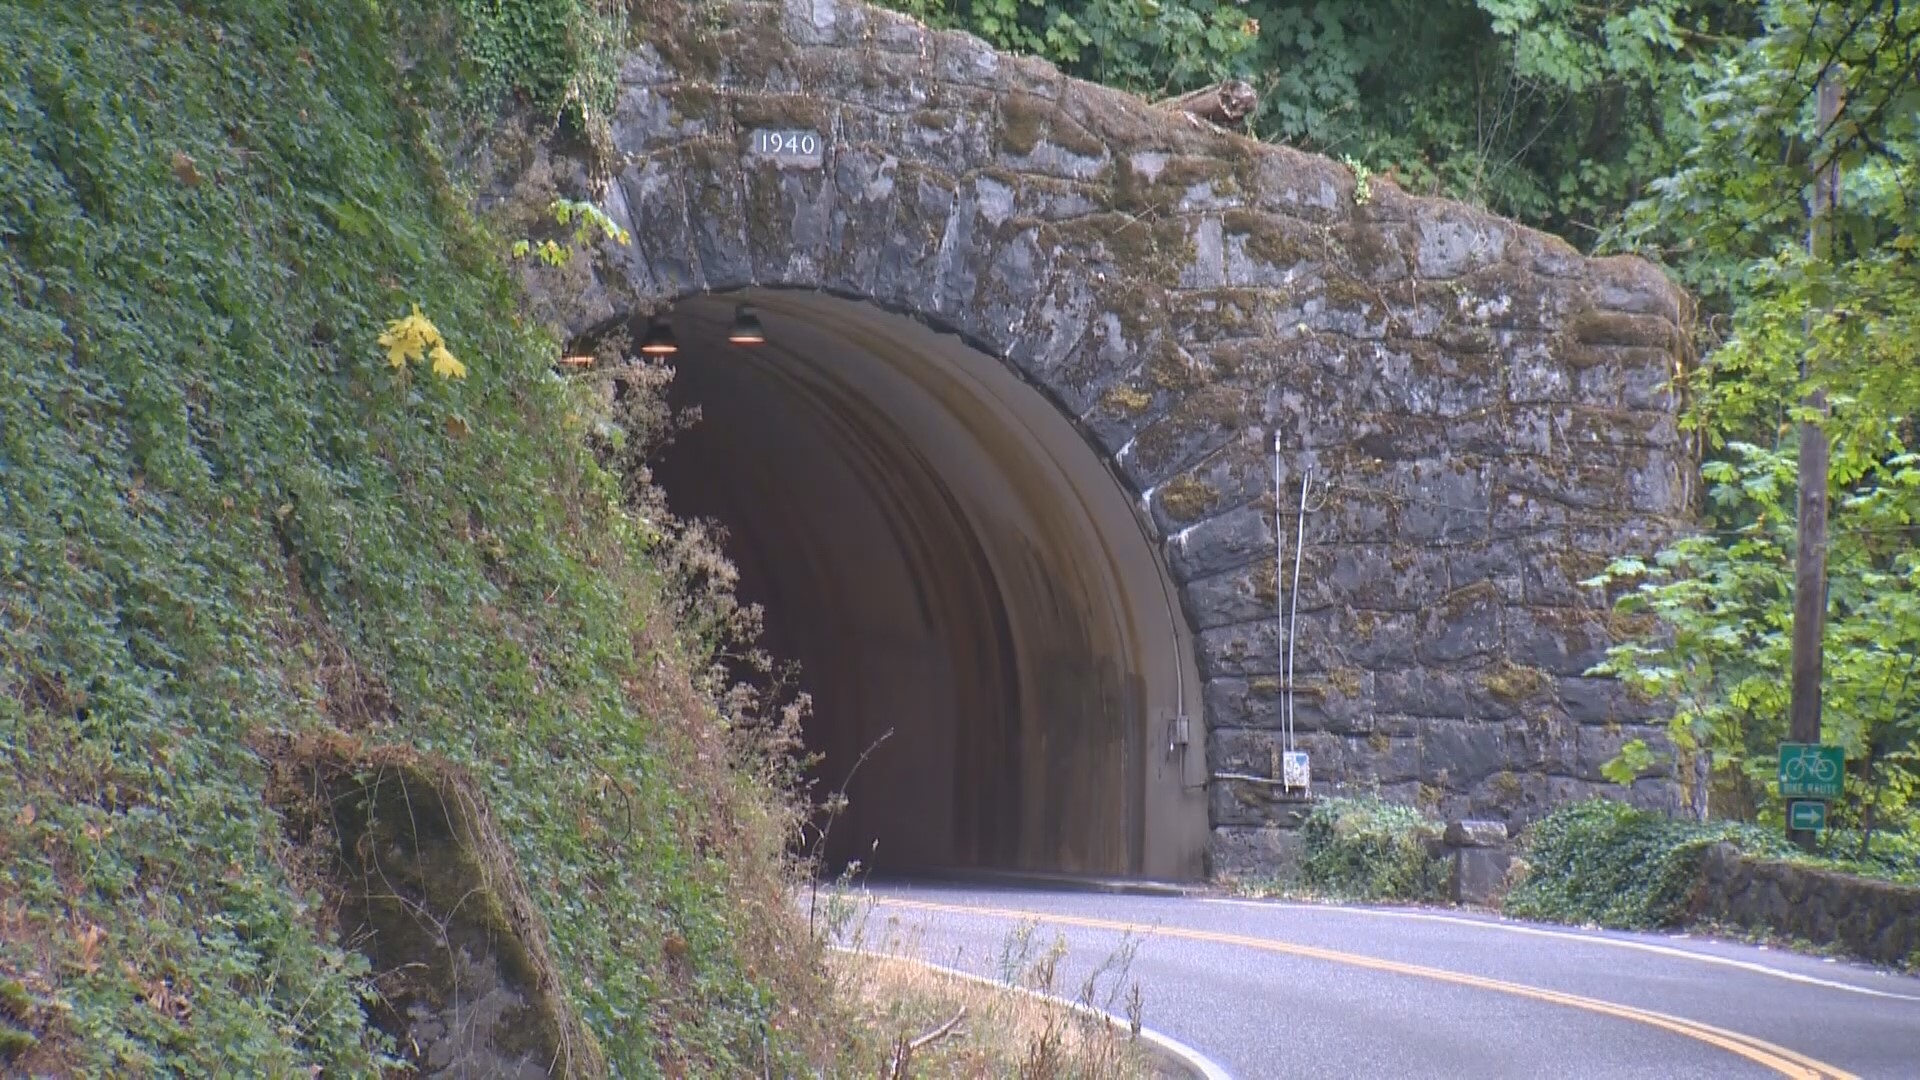 Tunnel repairs are nearly complete, but the Portland Bureau of Transportation is not ready to update the reopening date yet. Some local drivers are frustrated.